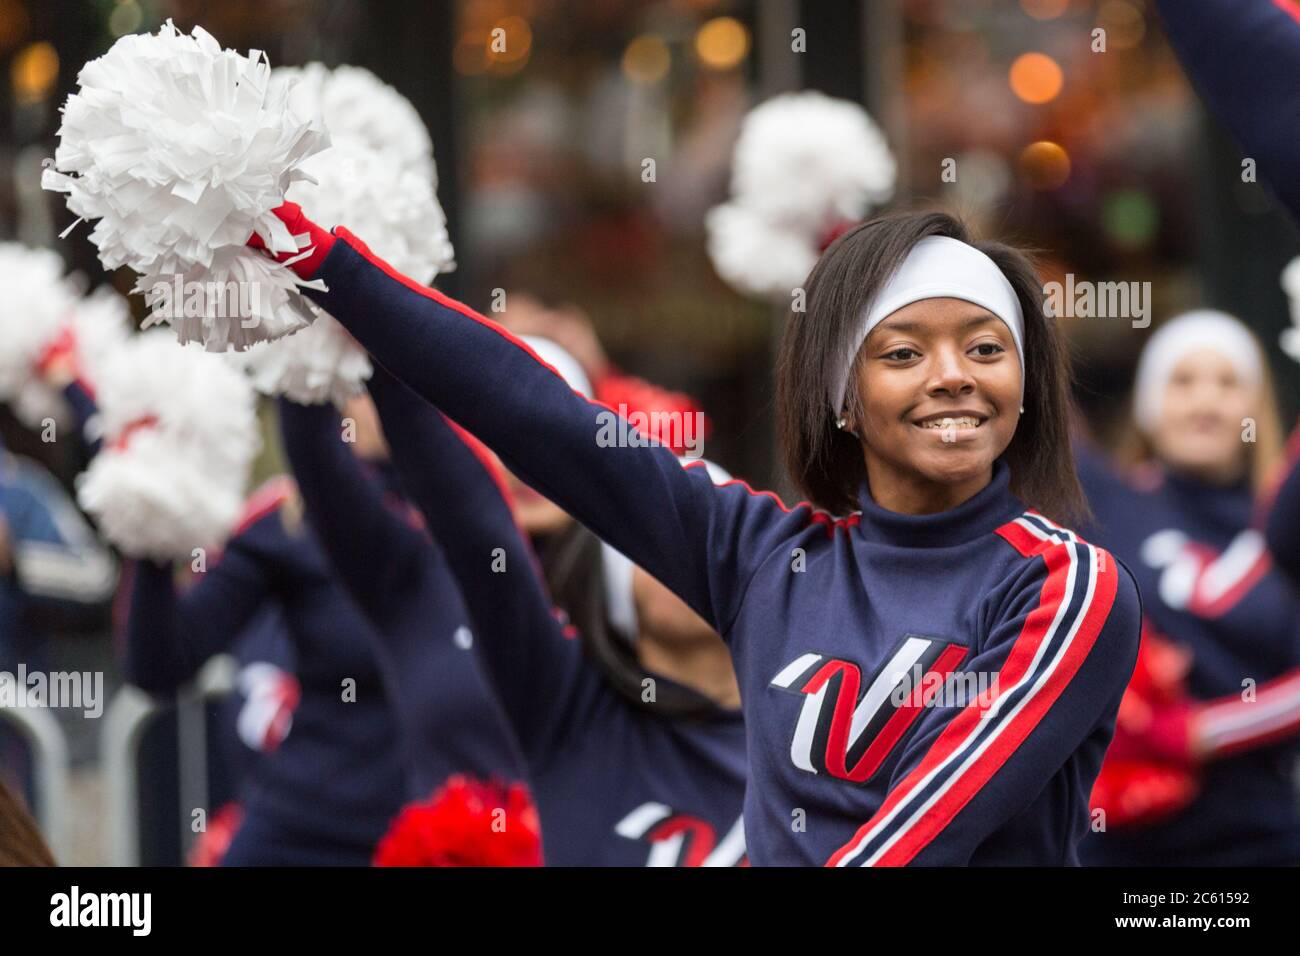 Varsity All American Cheerleaders entertain perform at 'London’s New Year’s Day Parade' (LNYDP) 2020 in London, England Stock Photo